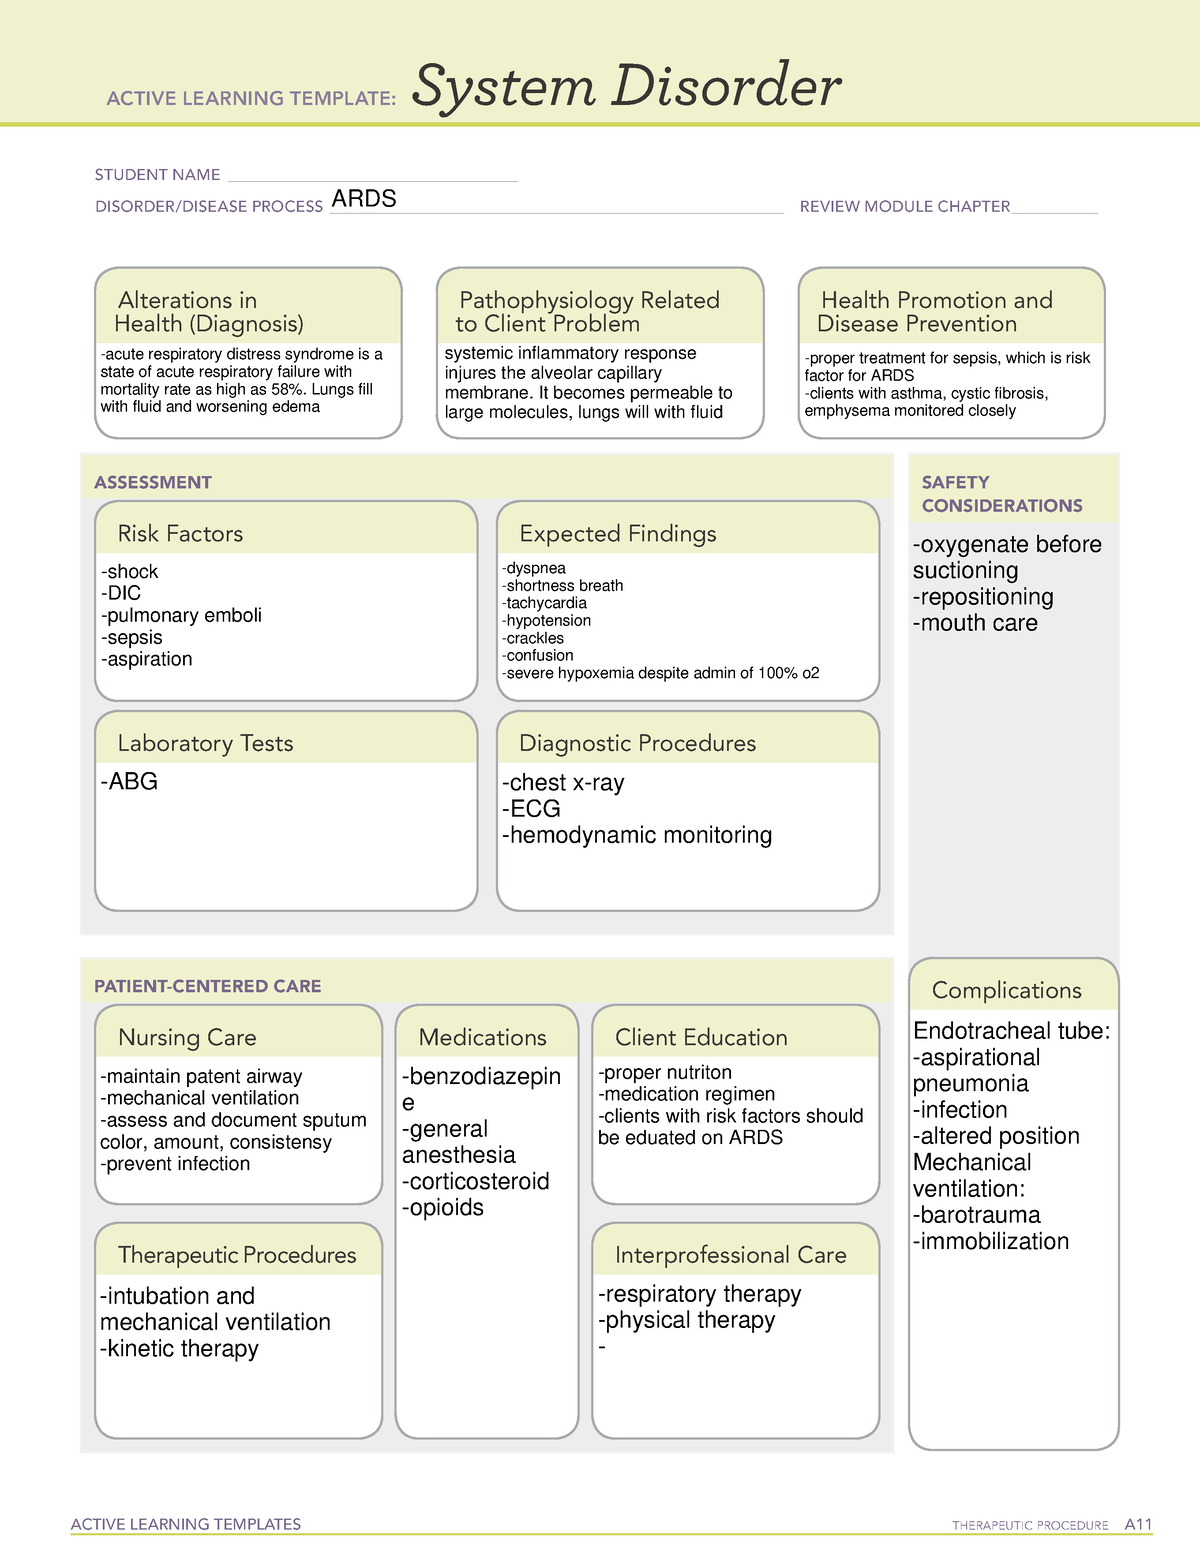 Active Learning Template system disorder ARDS - ACTIVE LEARNING ...